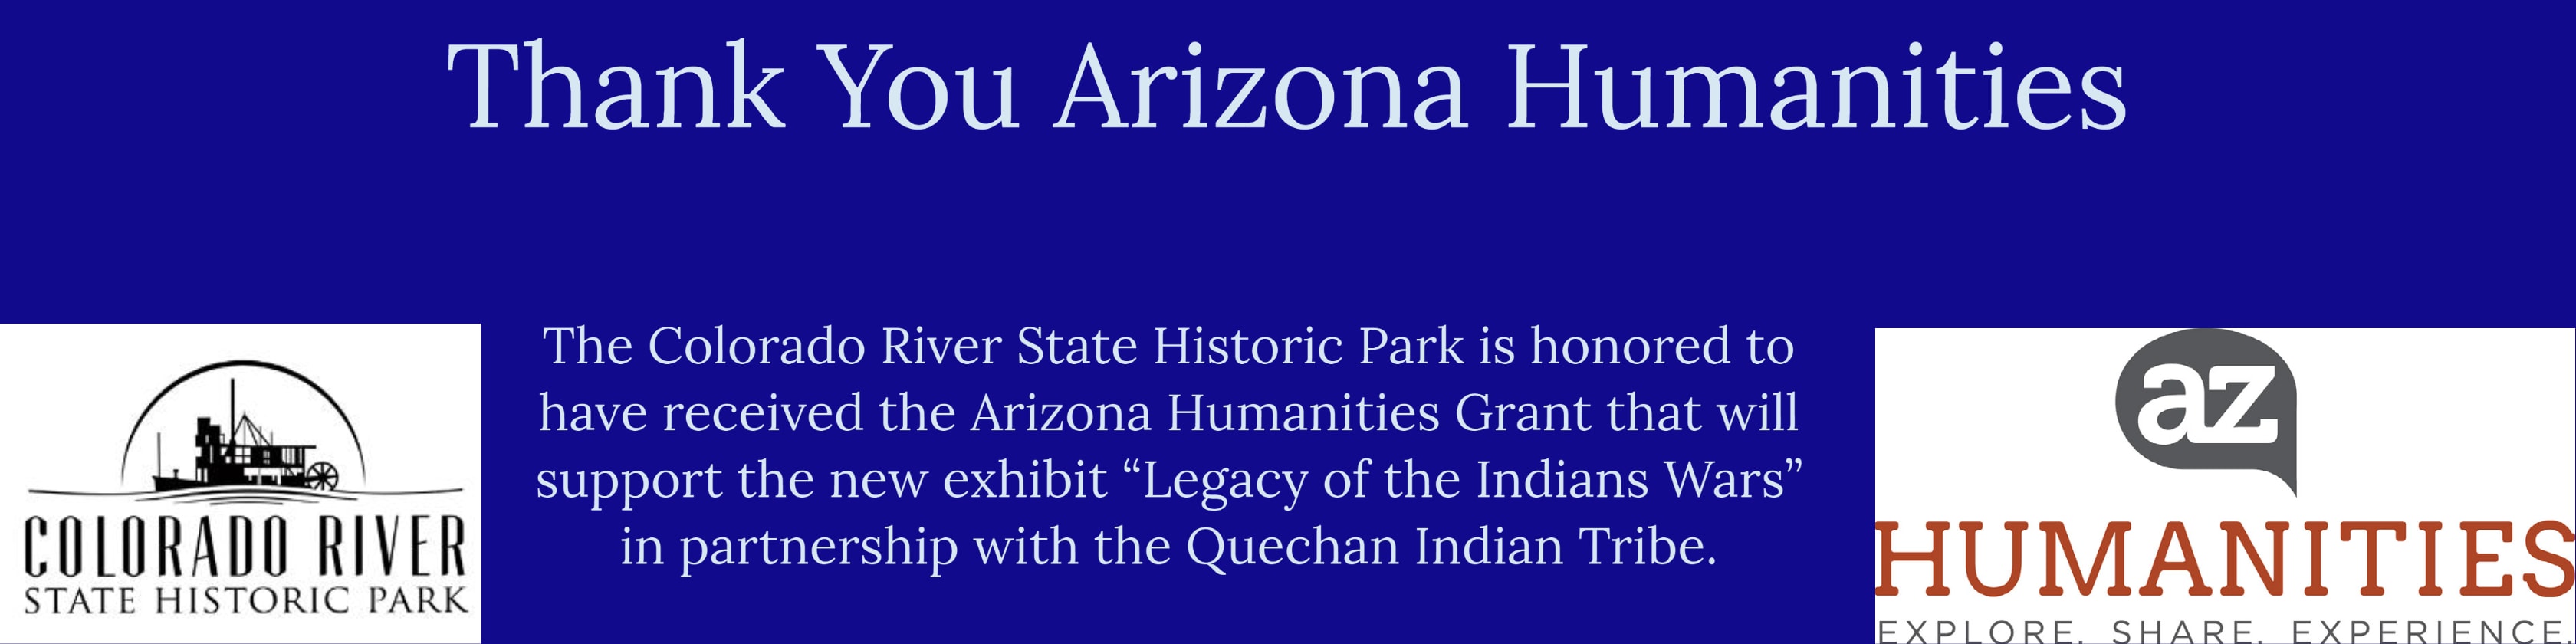 THe Colorado River State Historic Park is honored to have received the Arizona Humanities Grant that will support the new exhibit 'Legacy of the Indians Wars' in partnership with the Quechan Indian Tribe